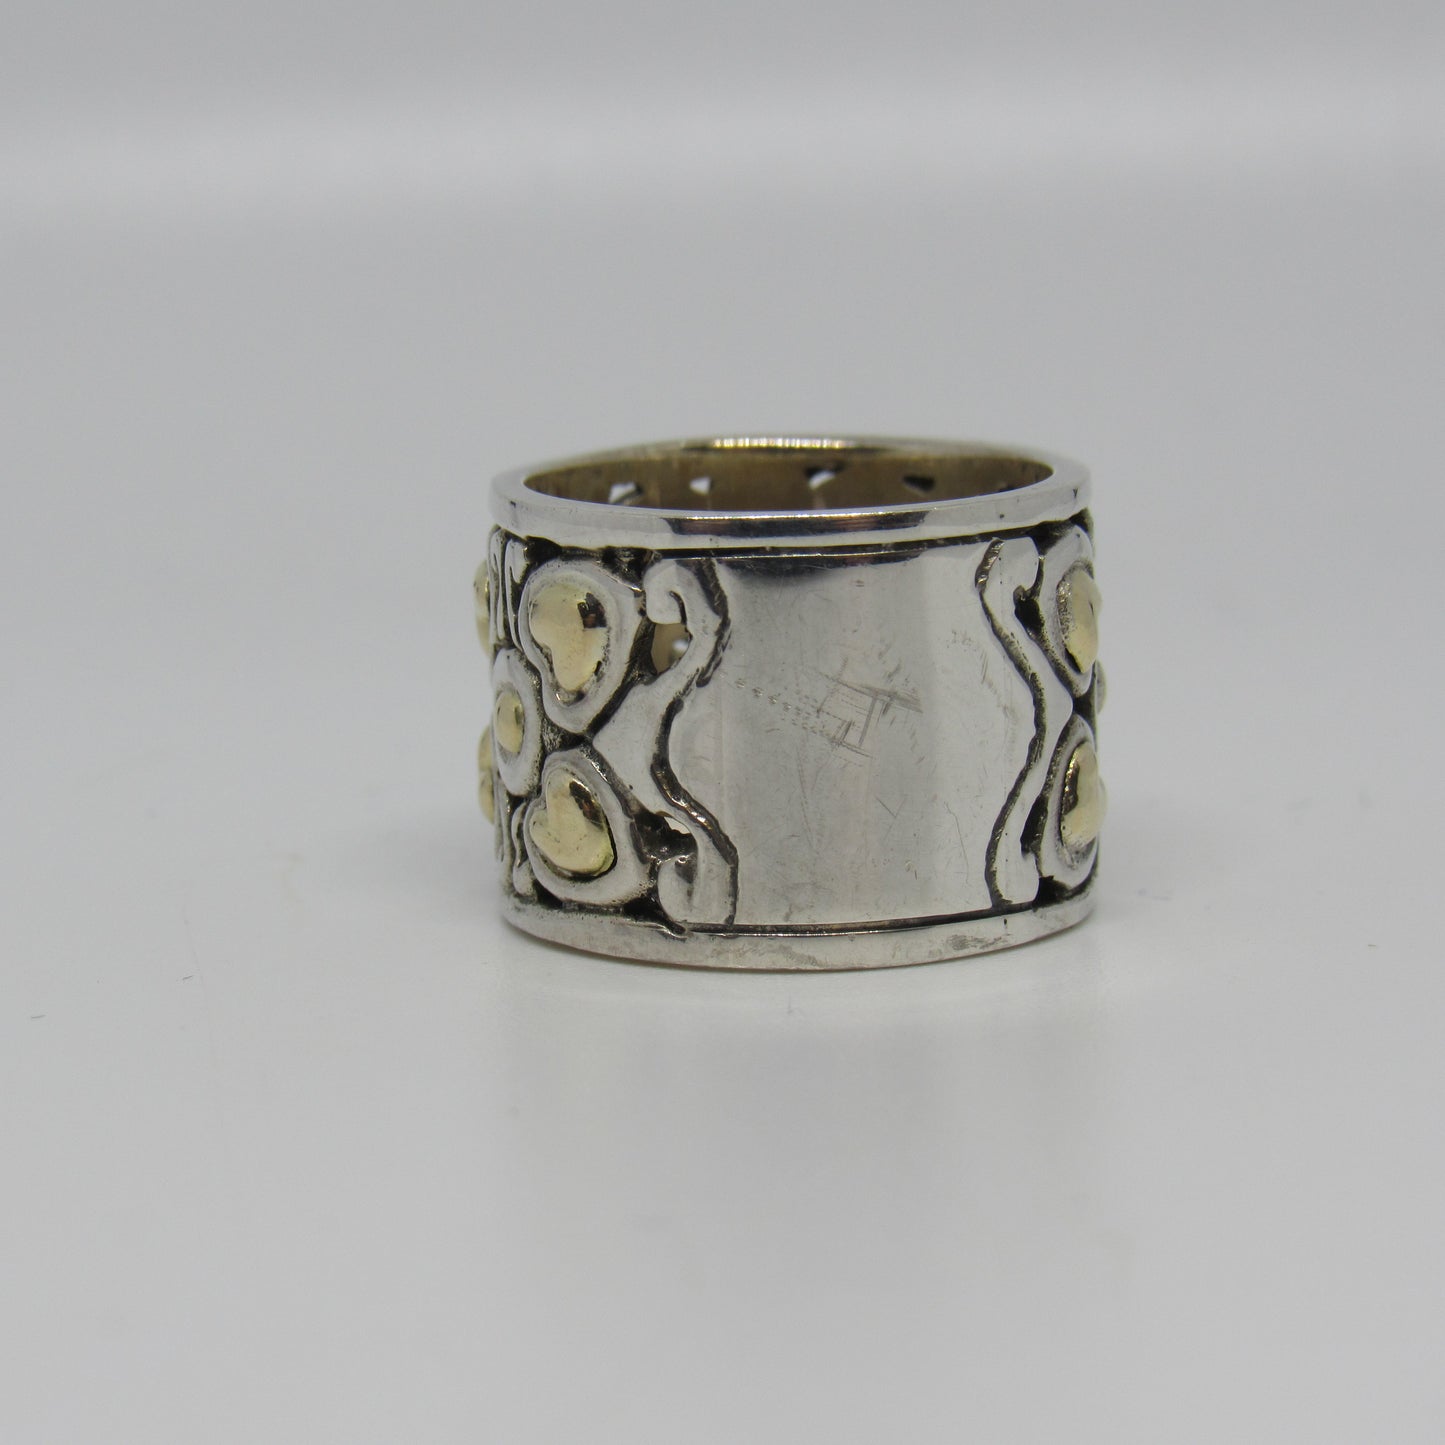 Vintage David Schorr DS/ID Sterling Silver 925 18k Band Ring - Size 5.75